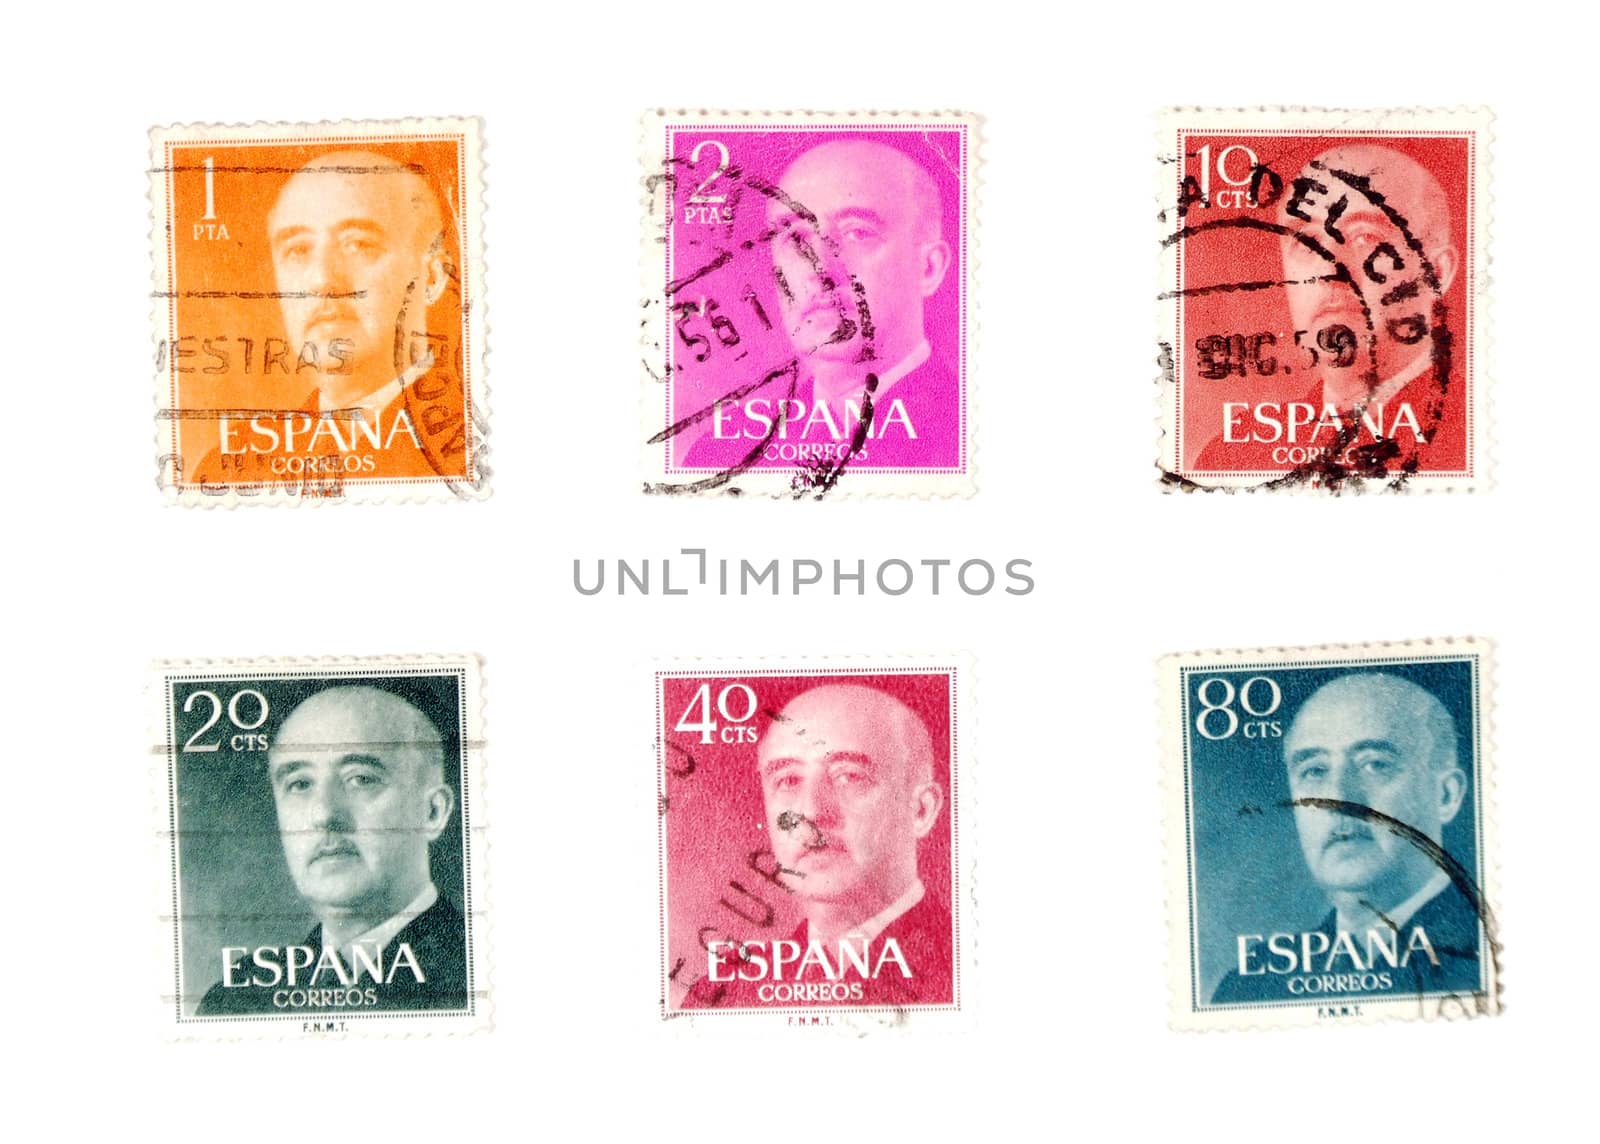 Old postage stamps from Spain by tupungato